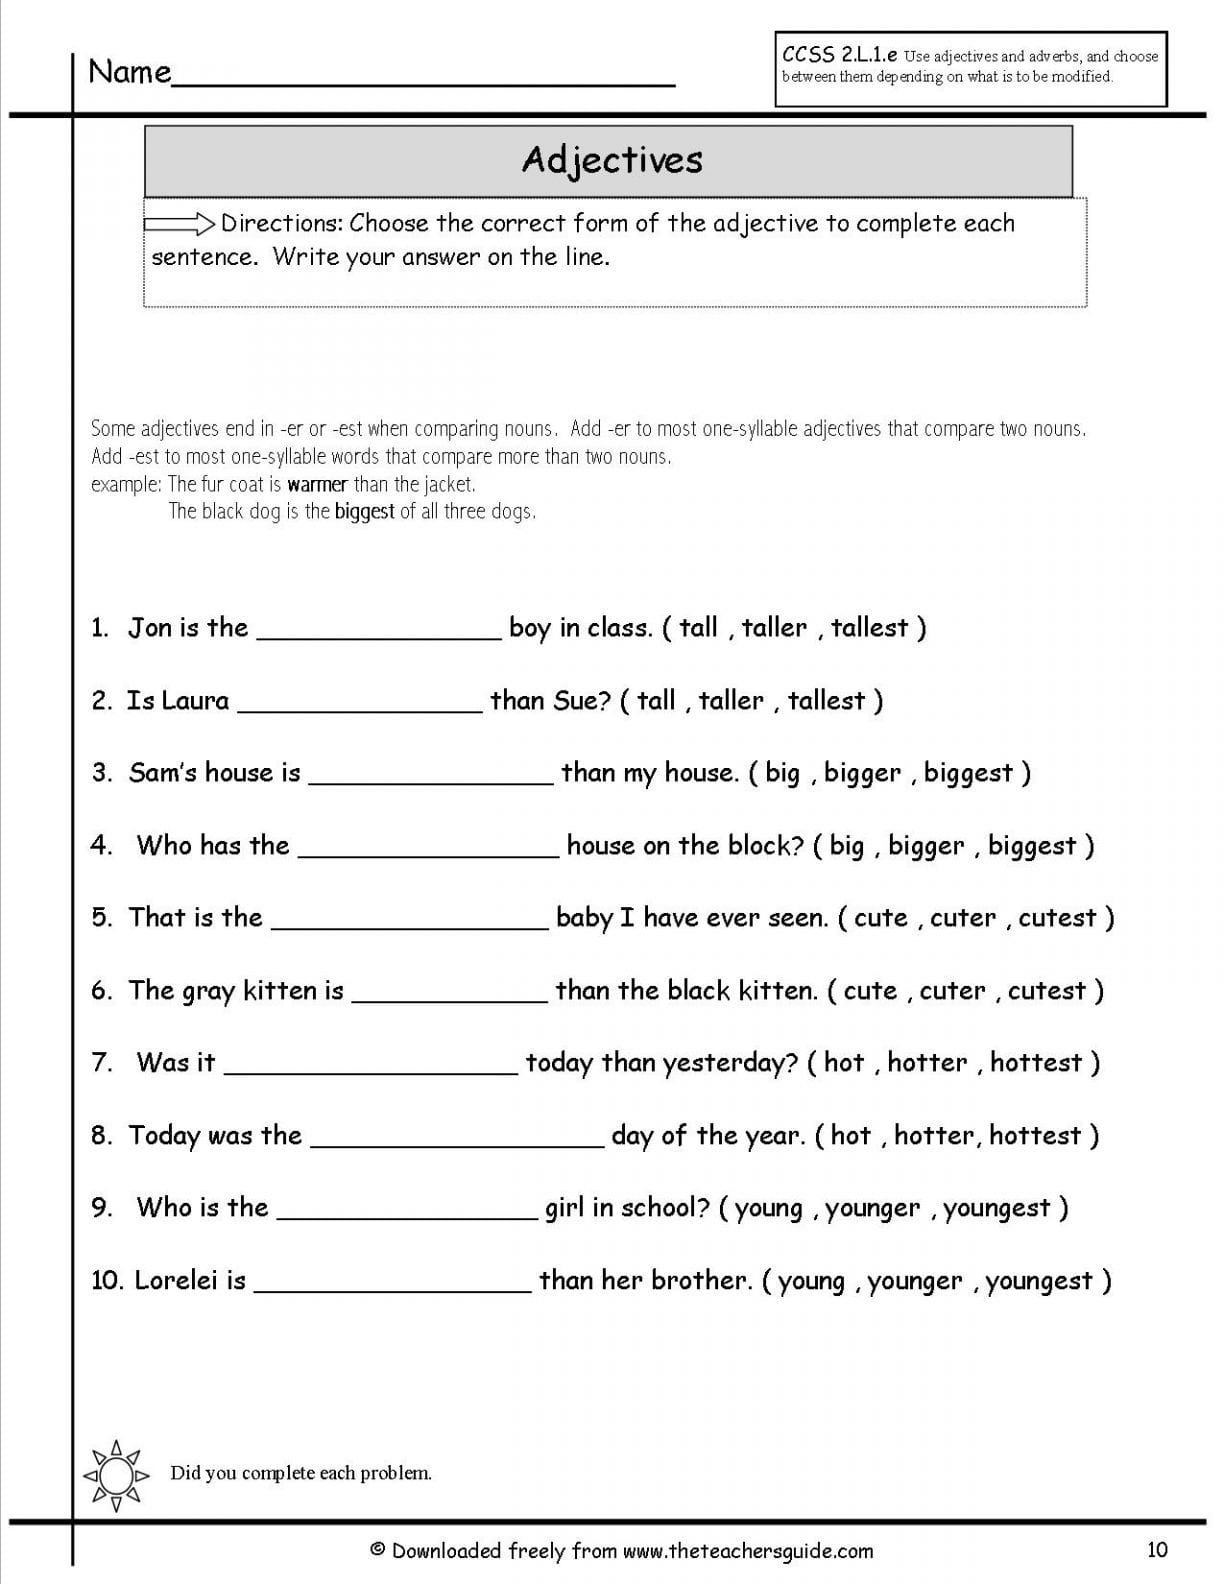 fun-for-starters-cambridge-english-worksheets-for-kids-1st-grade